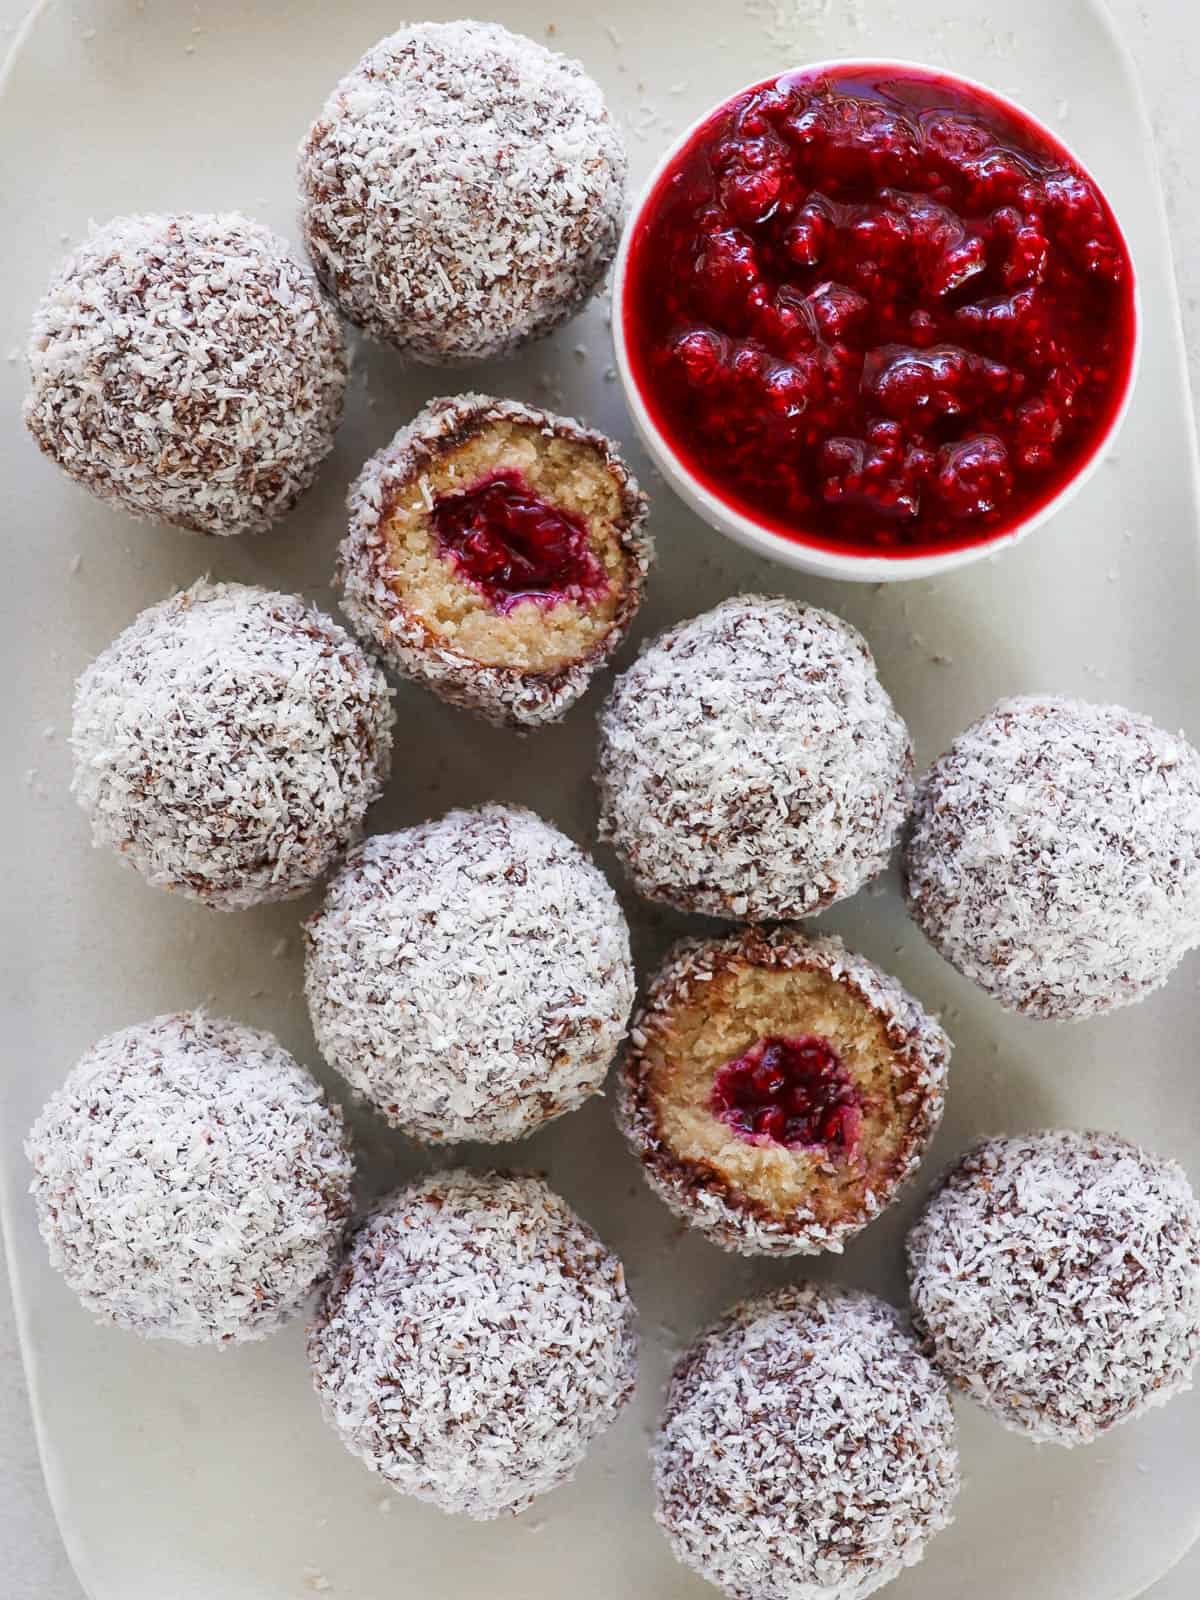 Plate of Lamington balls with mashed raspberries on side.